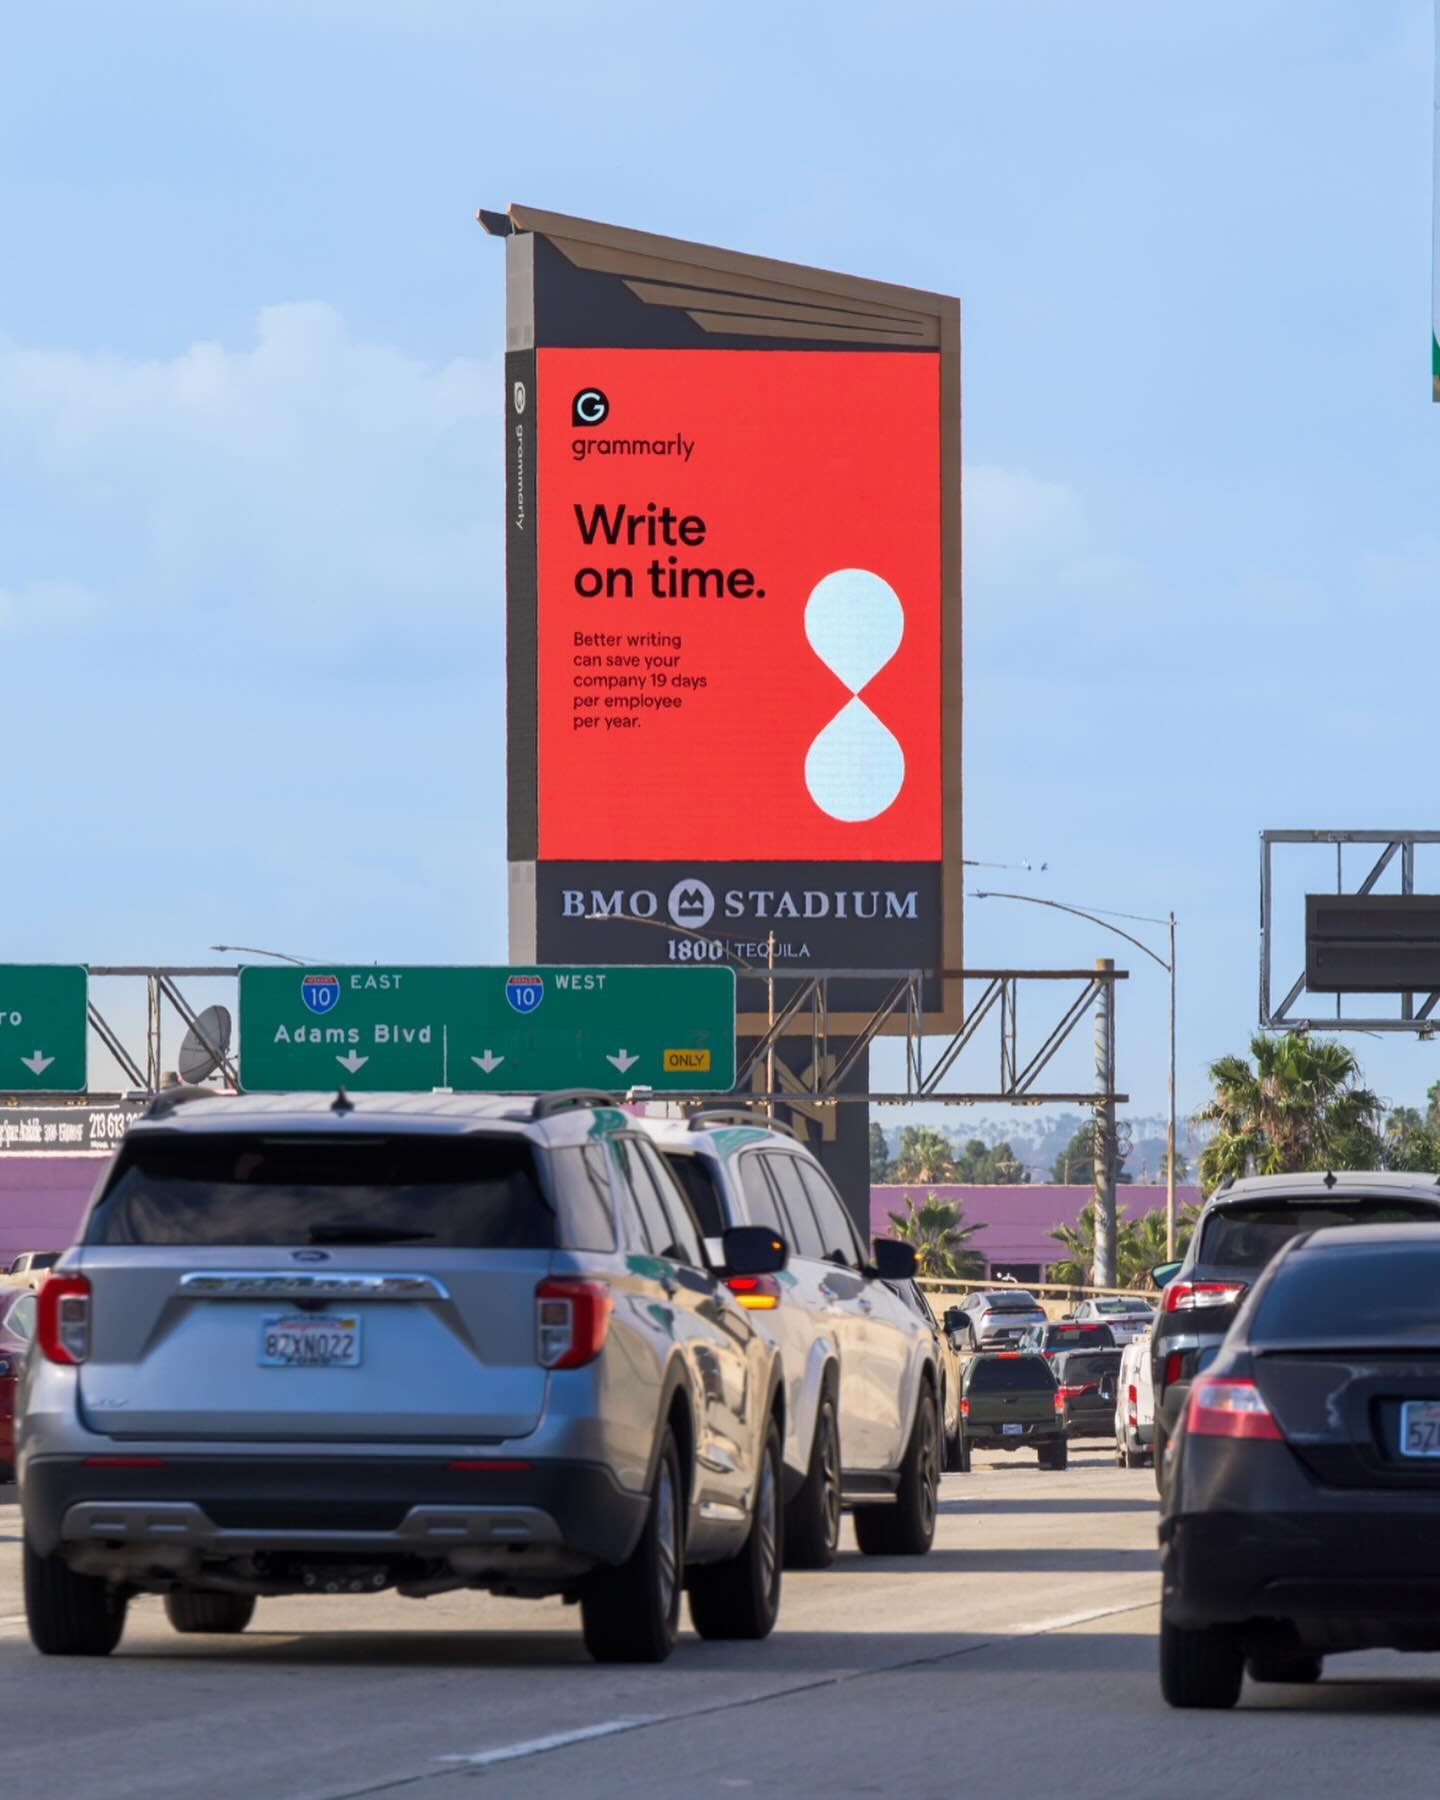 The Towers are always the &ldquo;write&rdquo; way to advertise 😉 

@grammarly #iconicmedia #media #ooh #dooh #grammarly